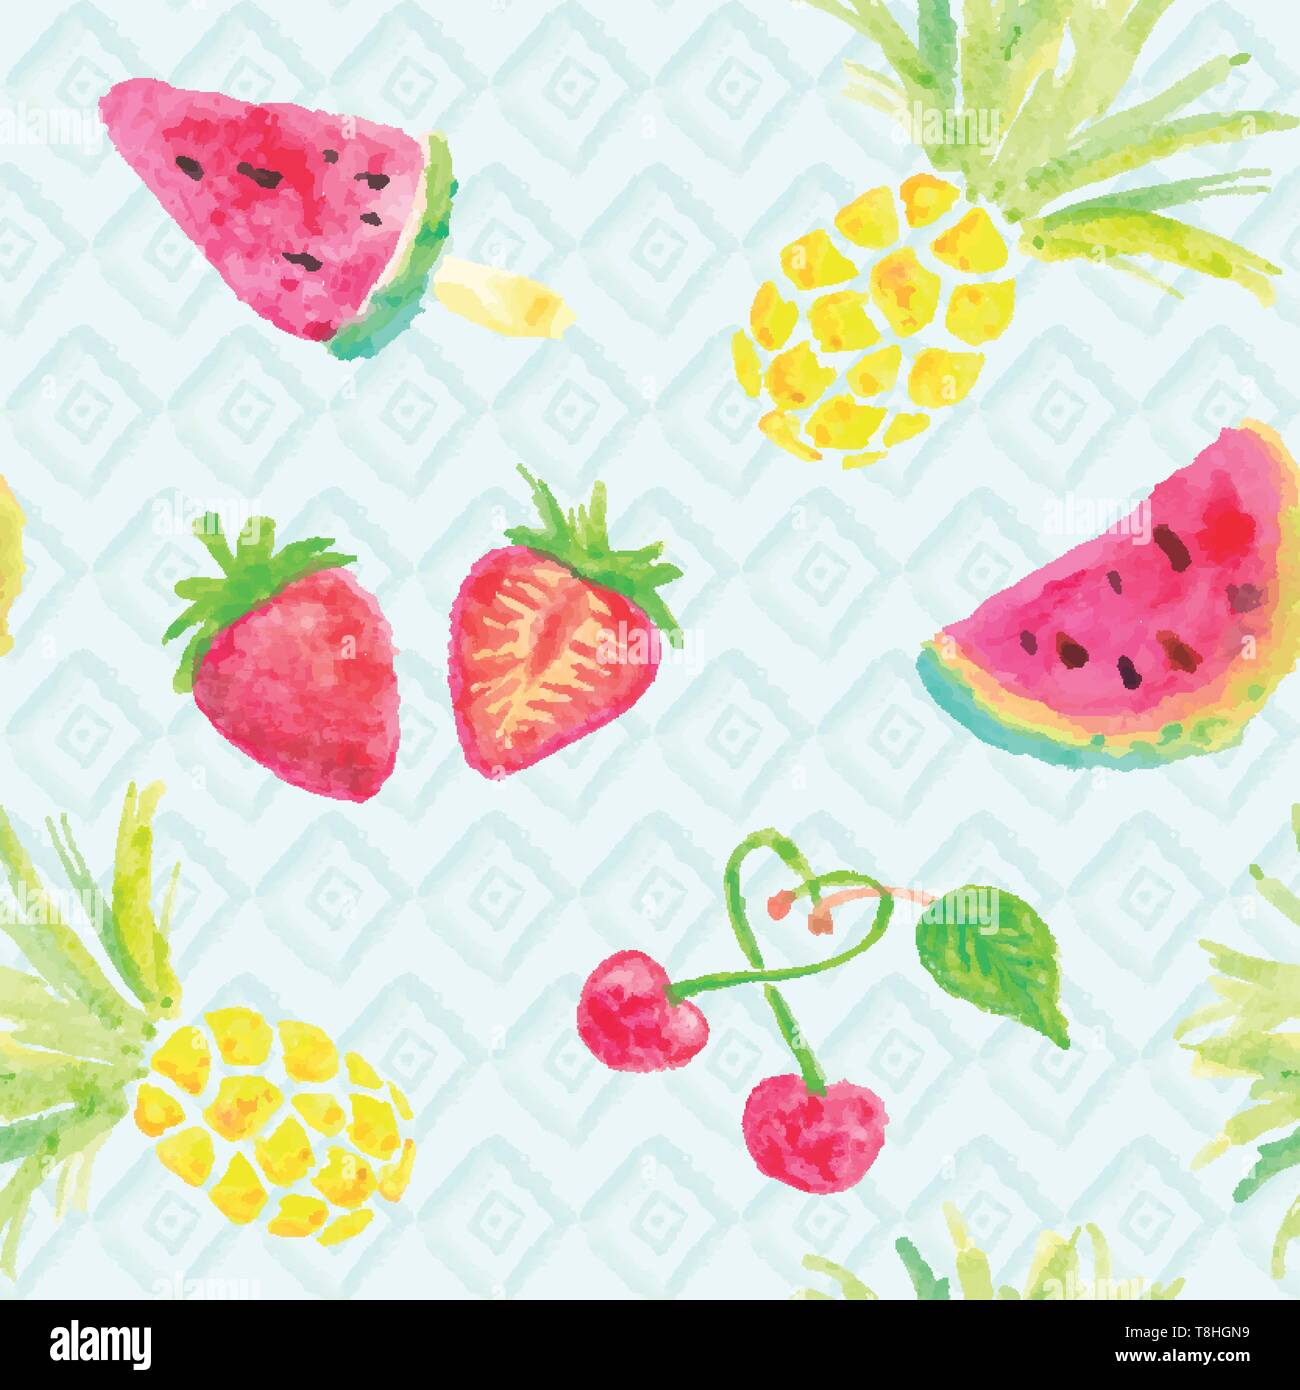 Colorful seamless fruits watercolor vector background Stock Vector